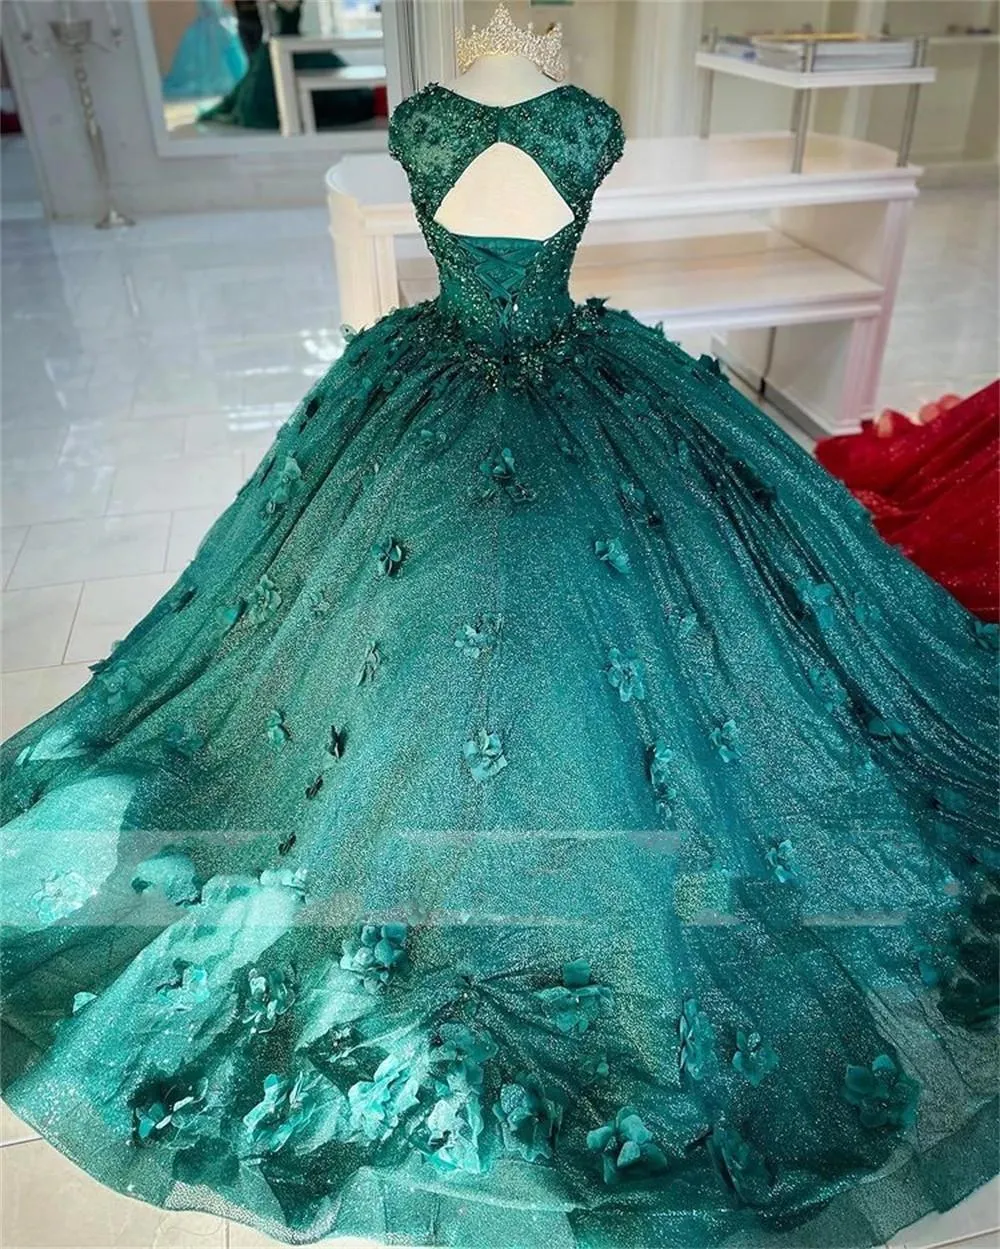 2022 Sexy Vintage Teal Quinceanera Dresses Sequined Lace Hunter Green Cap Sleeves Crystal Beads Hand Made Flowers Corset Back Sweet 16 Party Prom Dress Evening Gowns